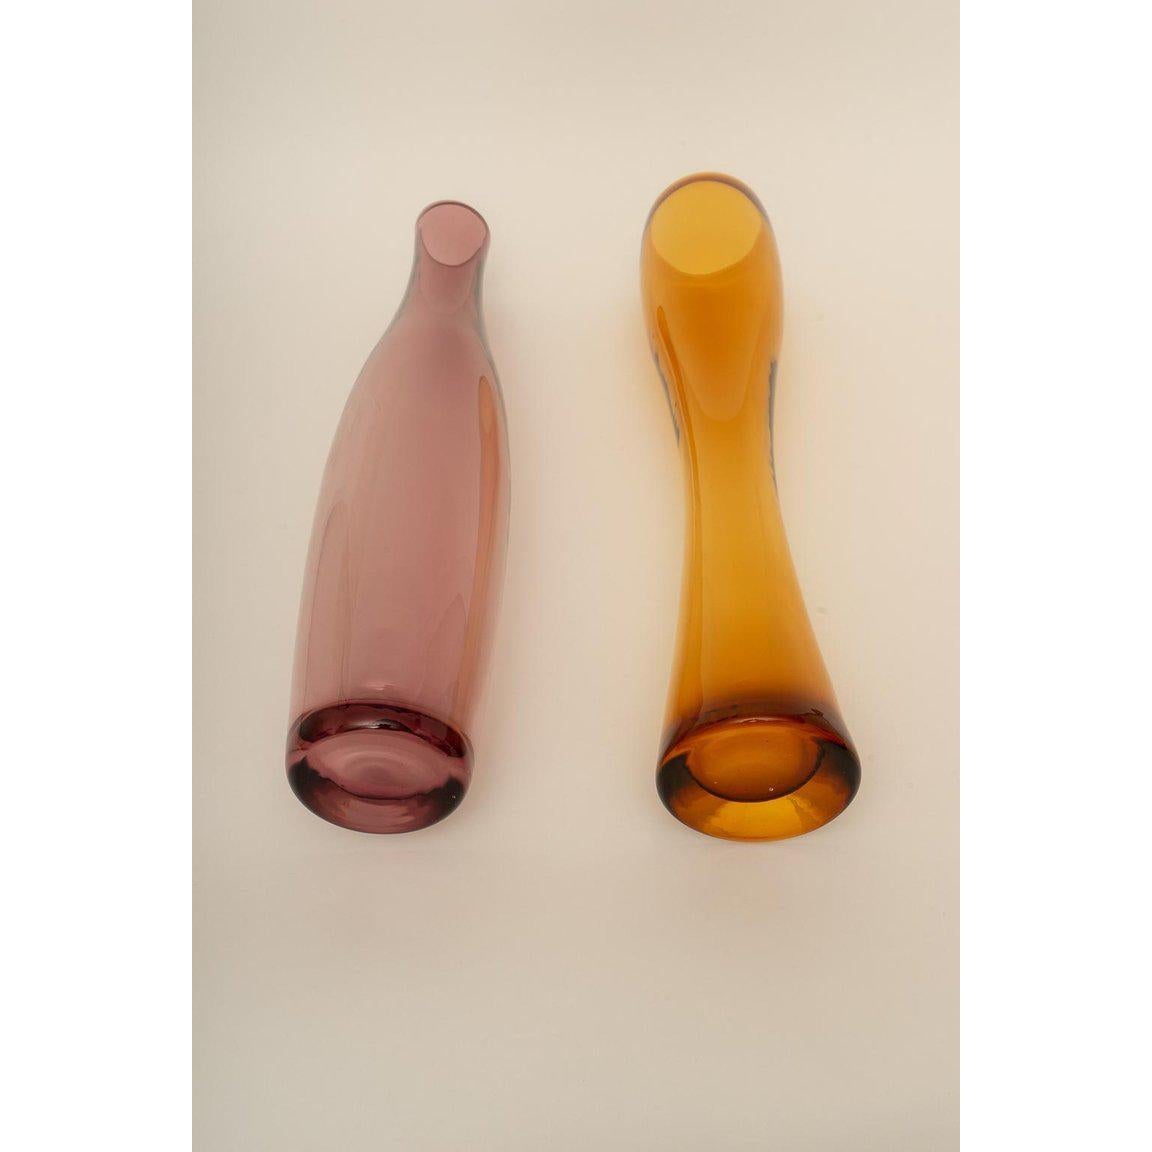 This stylish set of Italian, Oggetti Murano glass vases could be used as pure decoration or perhaps to hold you favorite cut flowers, bamboo or reeds. 

Note: Dimensions of the purple vase are 21.25